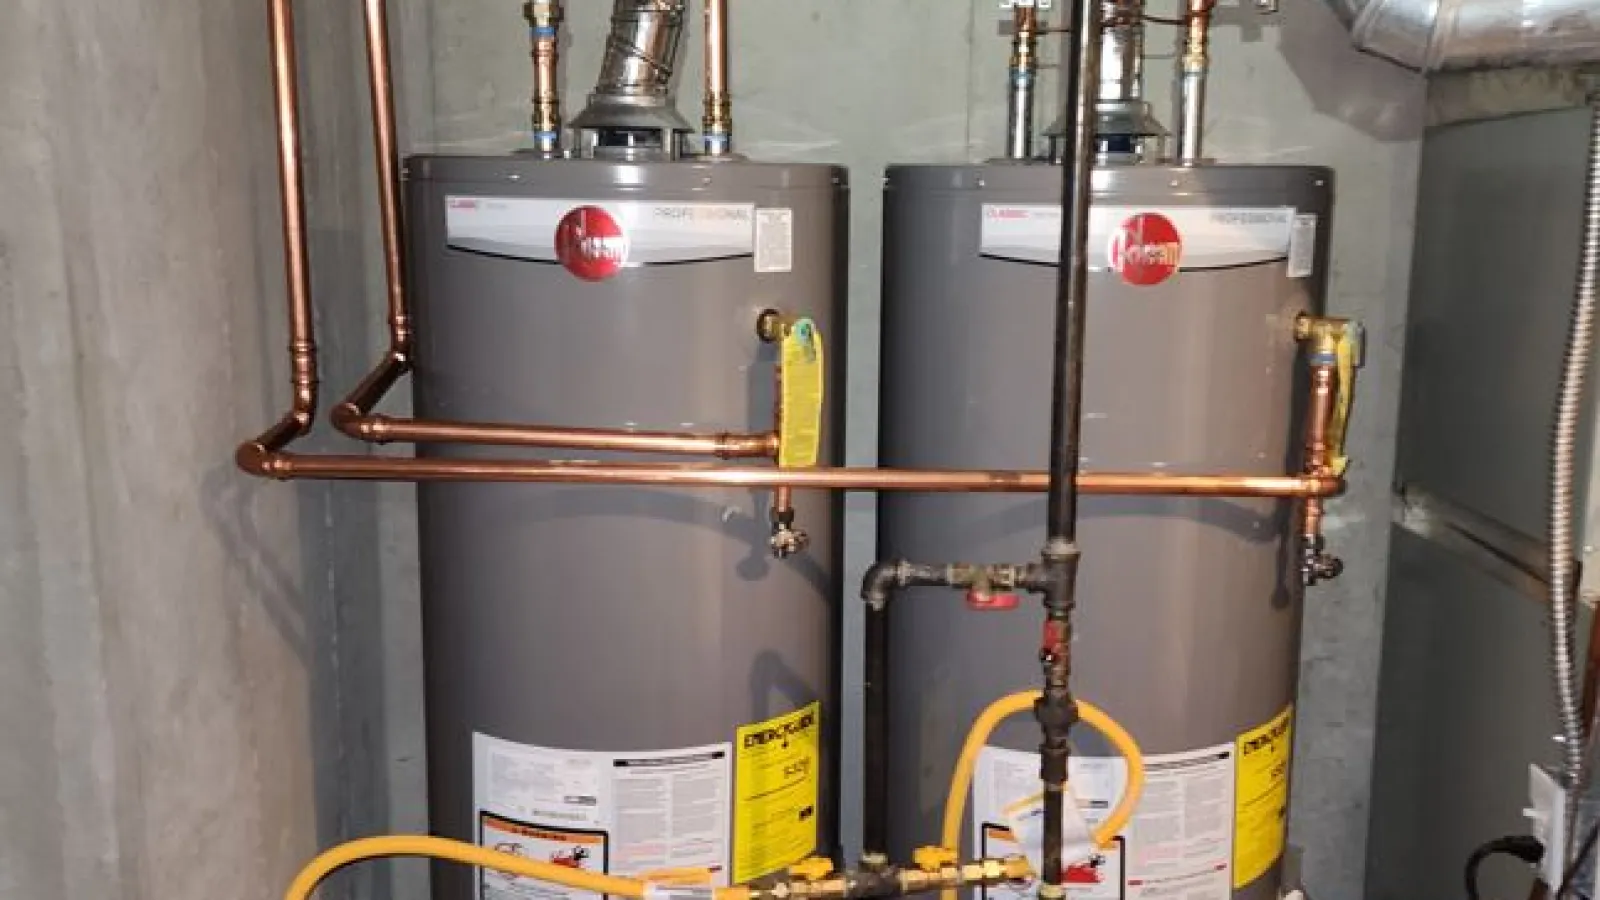 water heater keeps turning off. call Estes Services